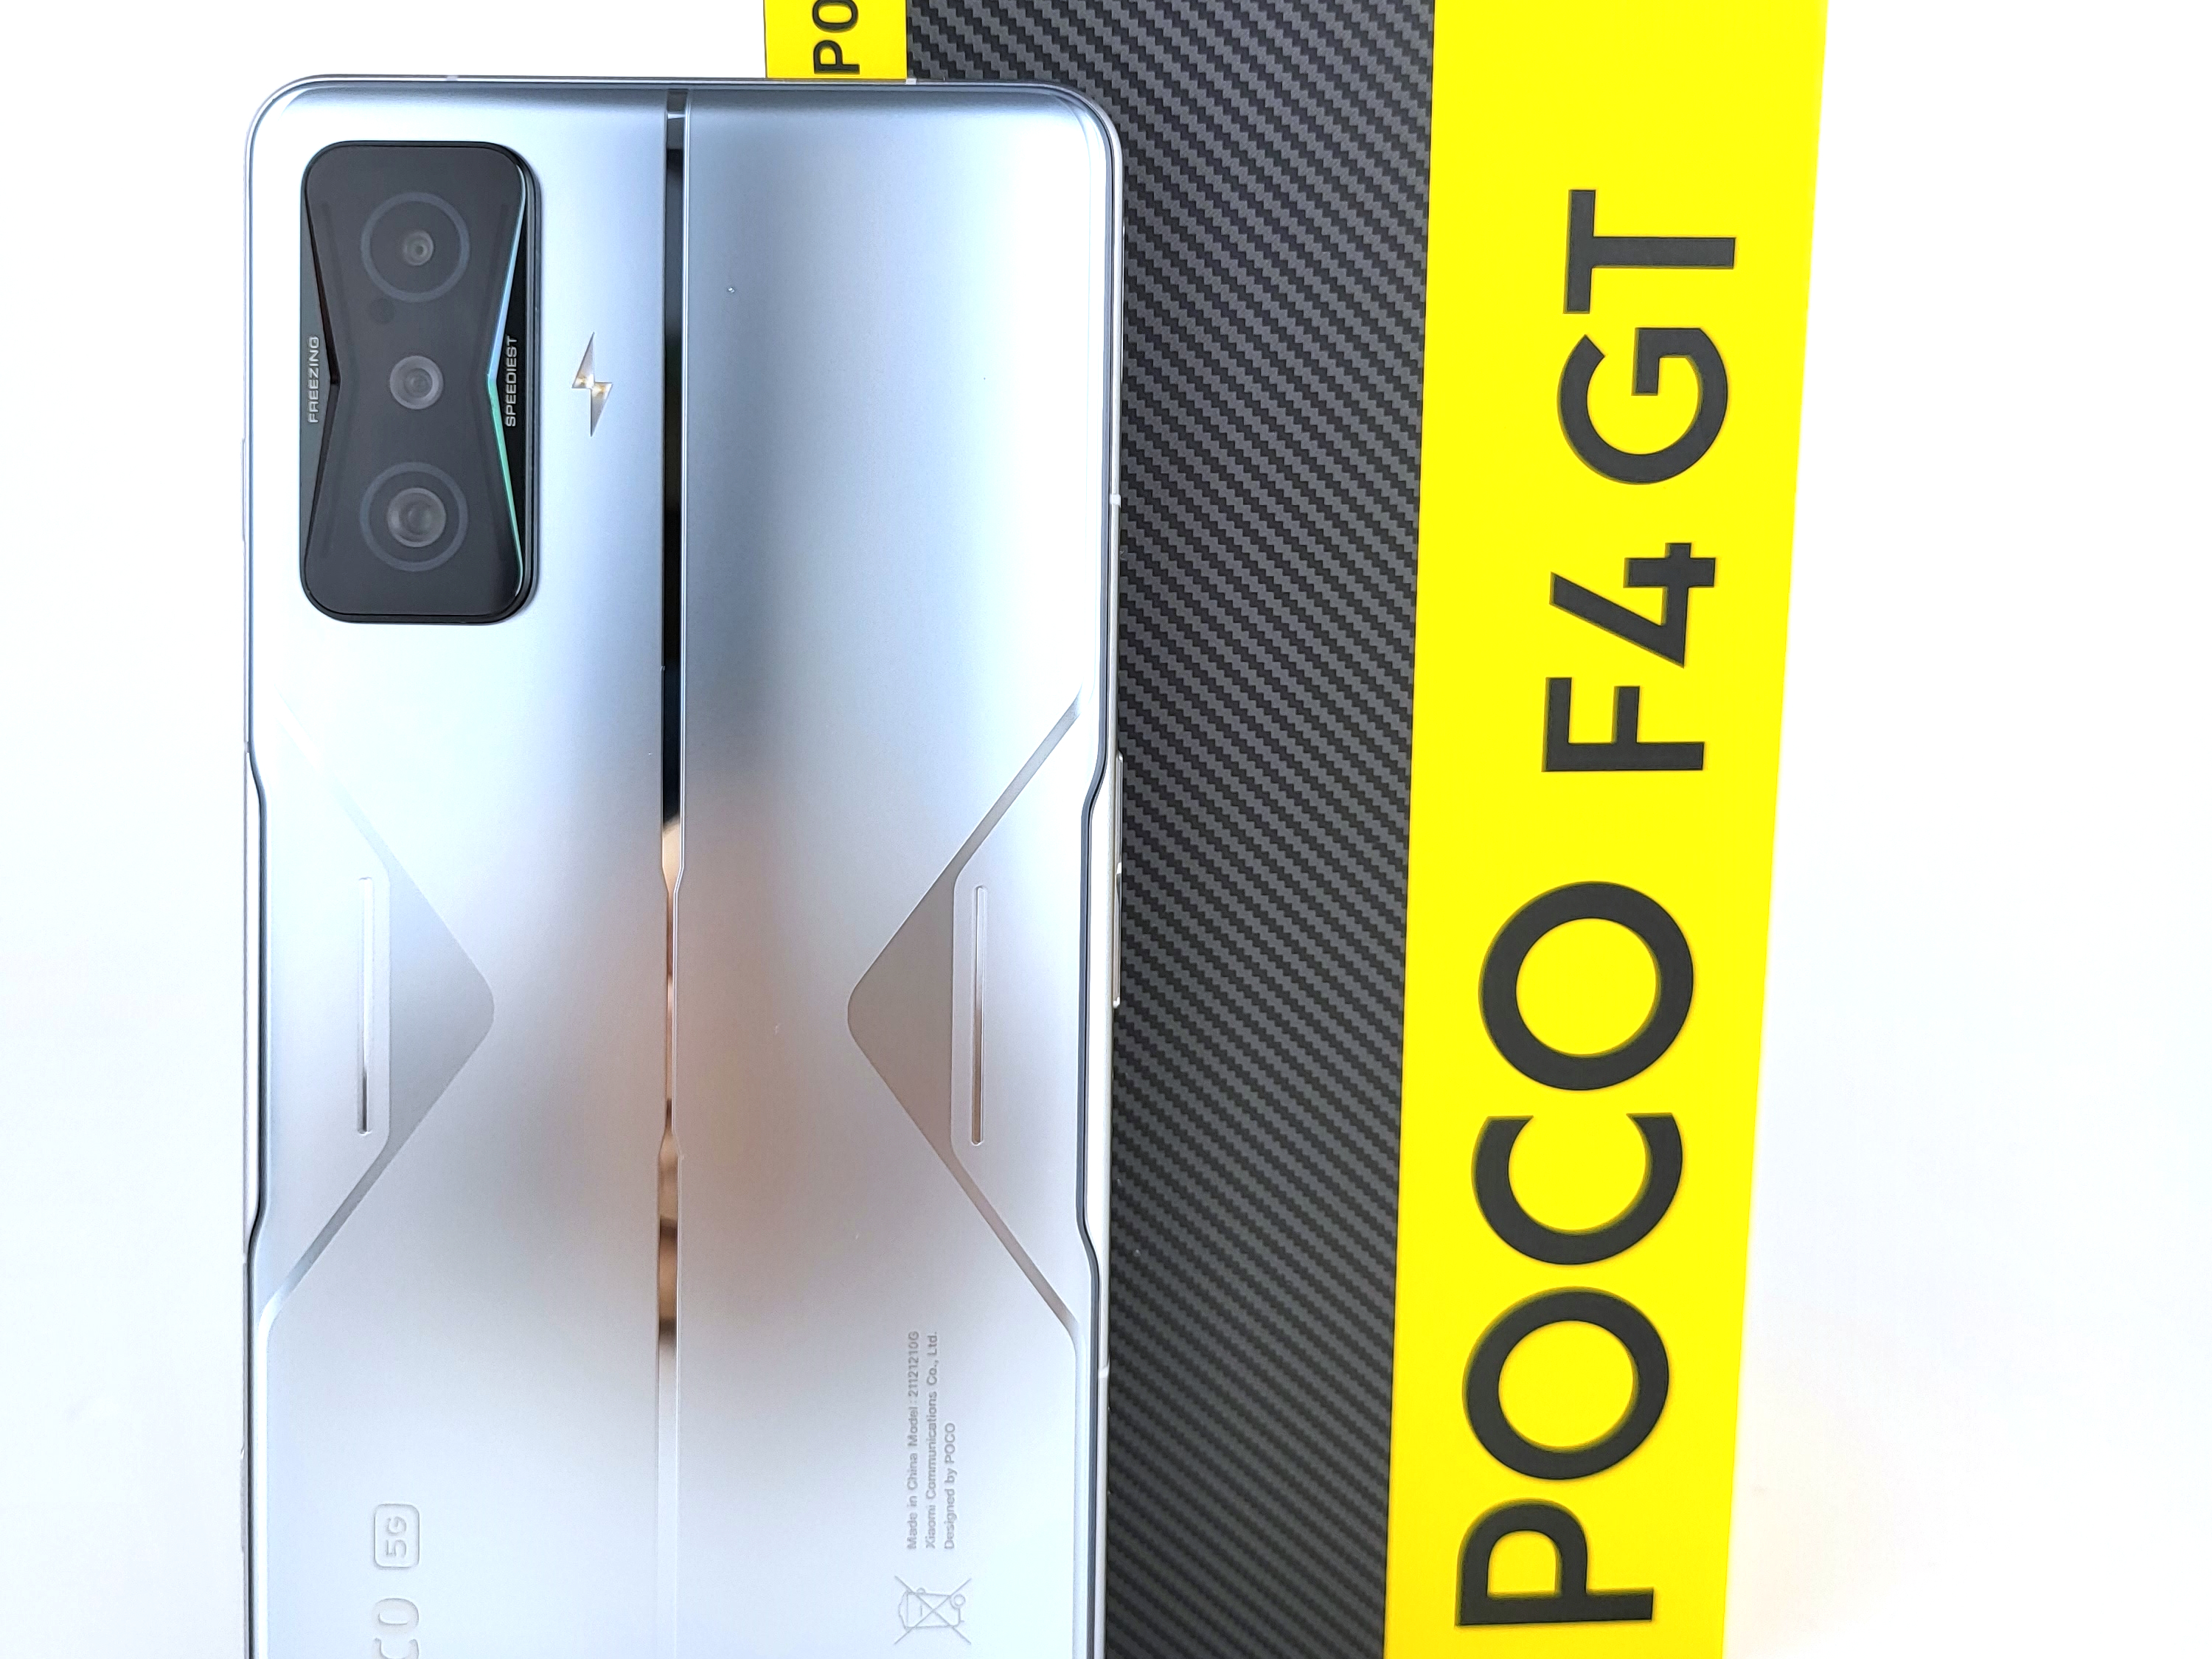 Poco F4 GT long-term review: Display, performance, battery life